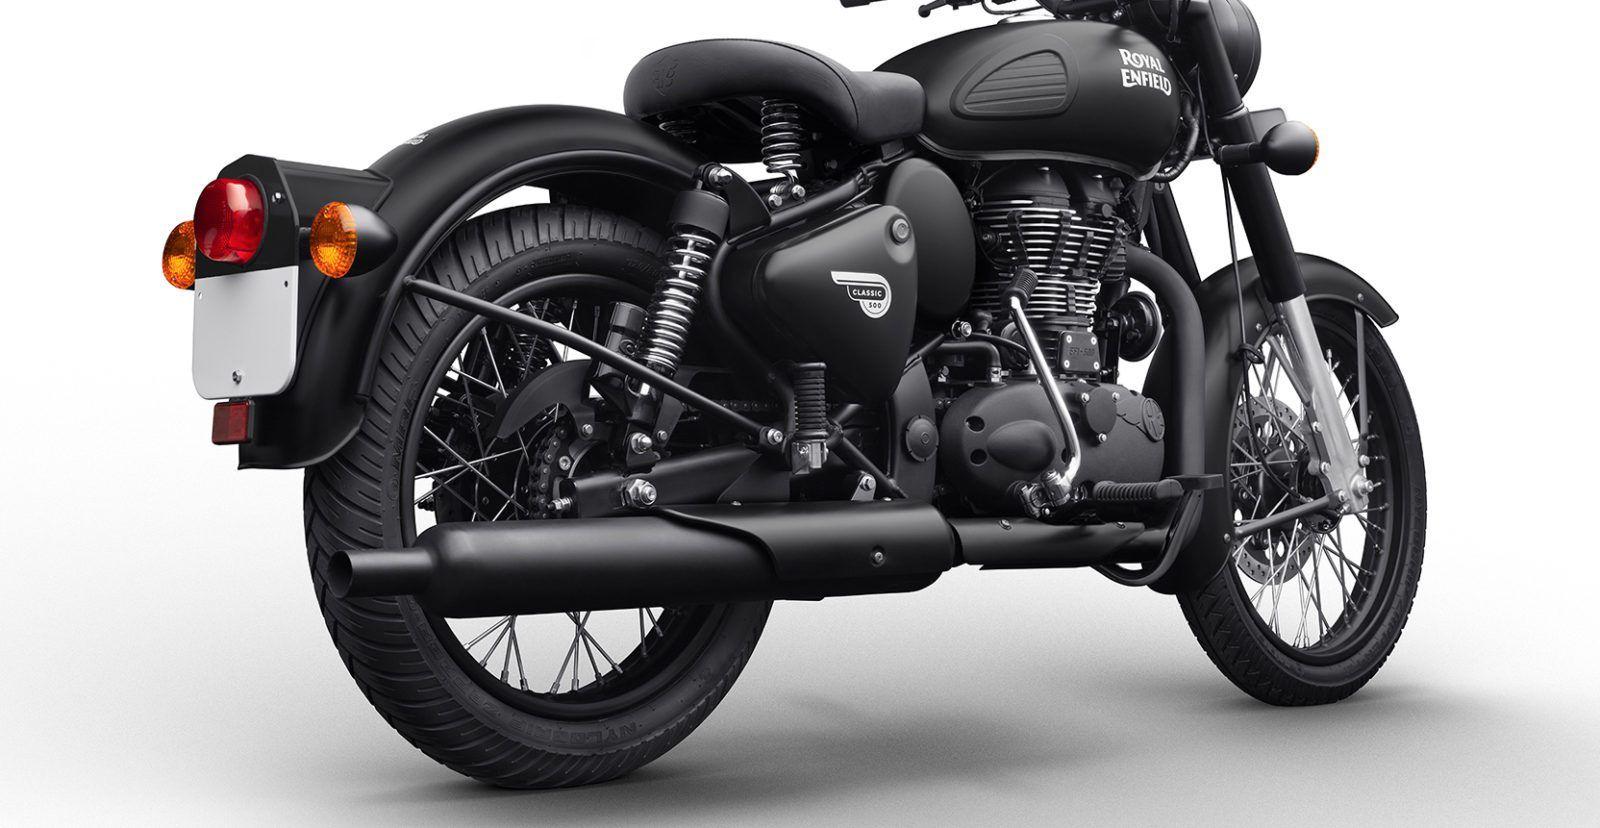 VIDEO: Royal Enfield Classic 500 Stealth Black Walk around Emerges